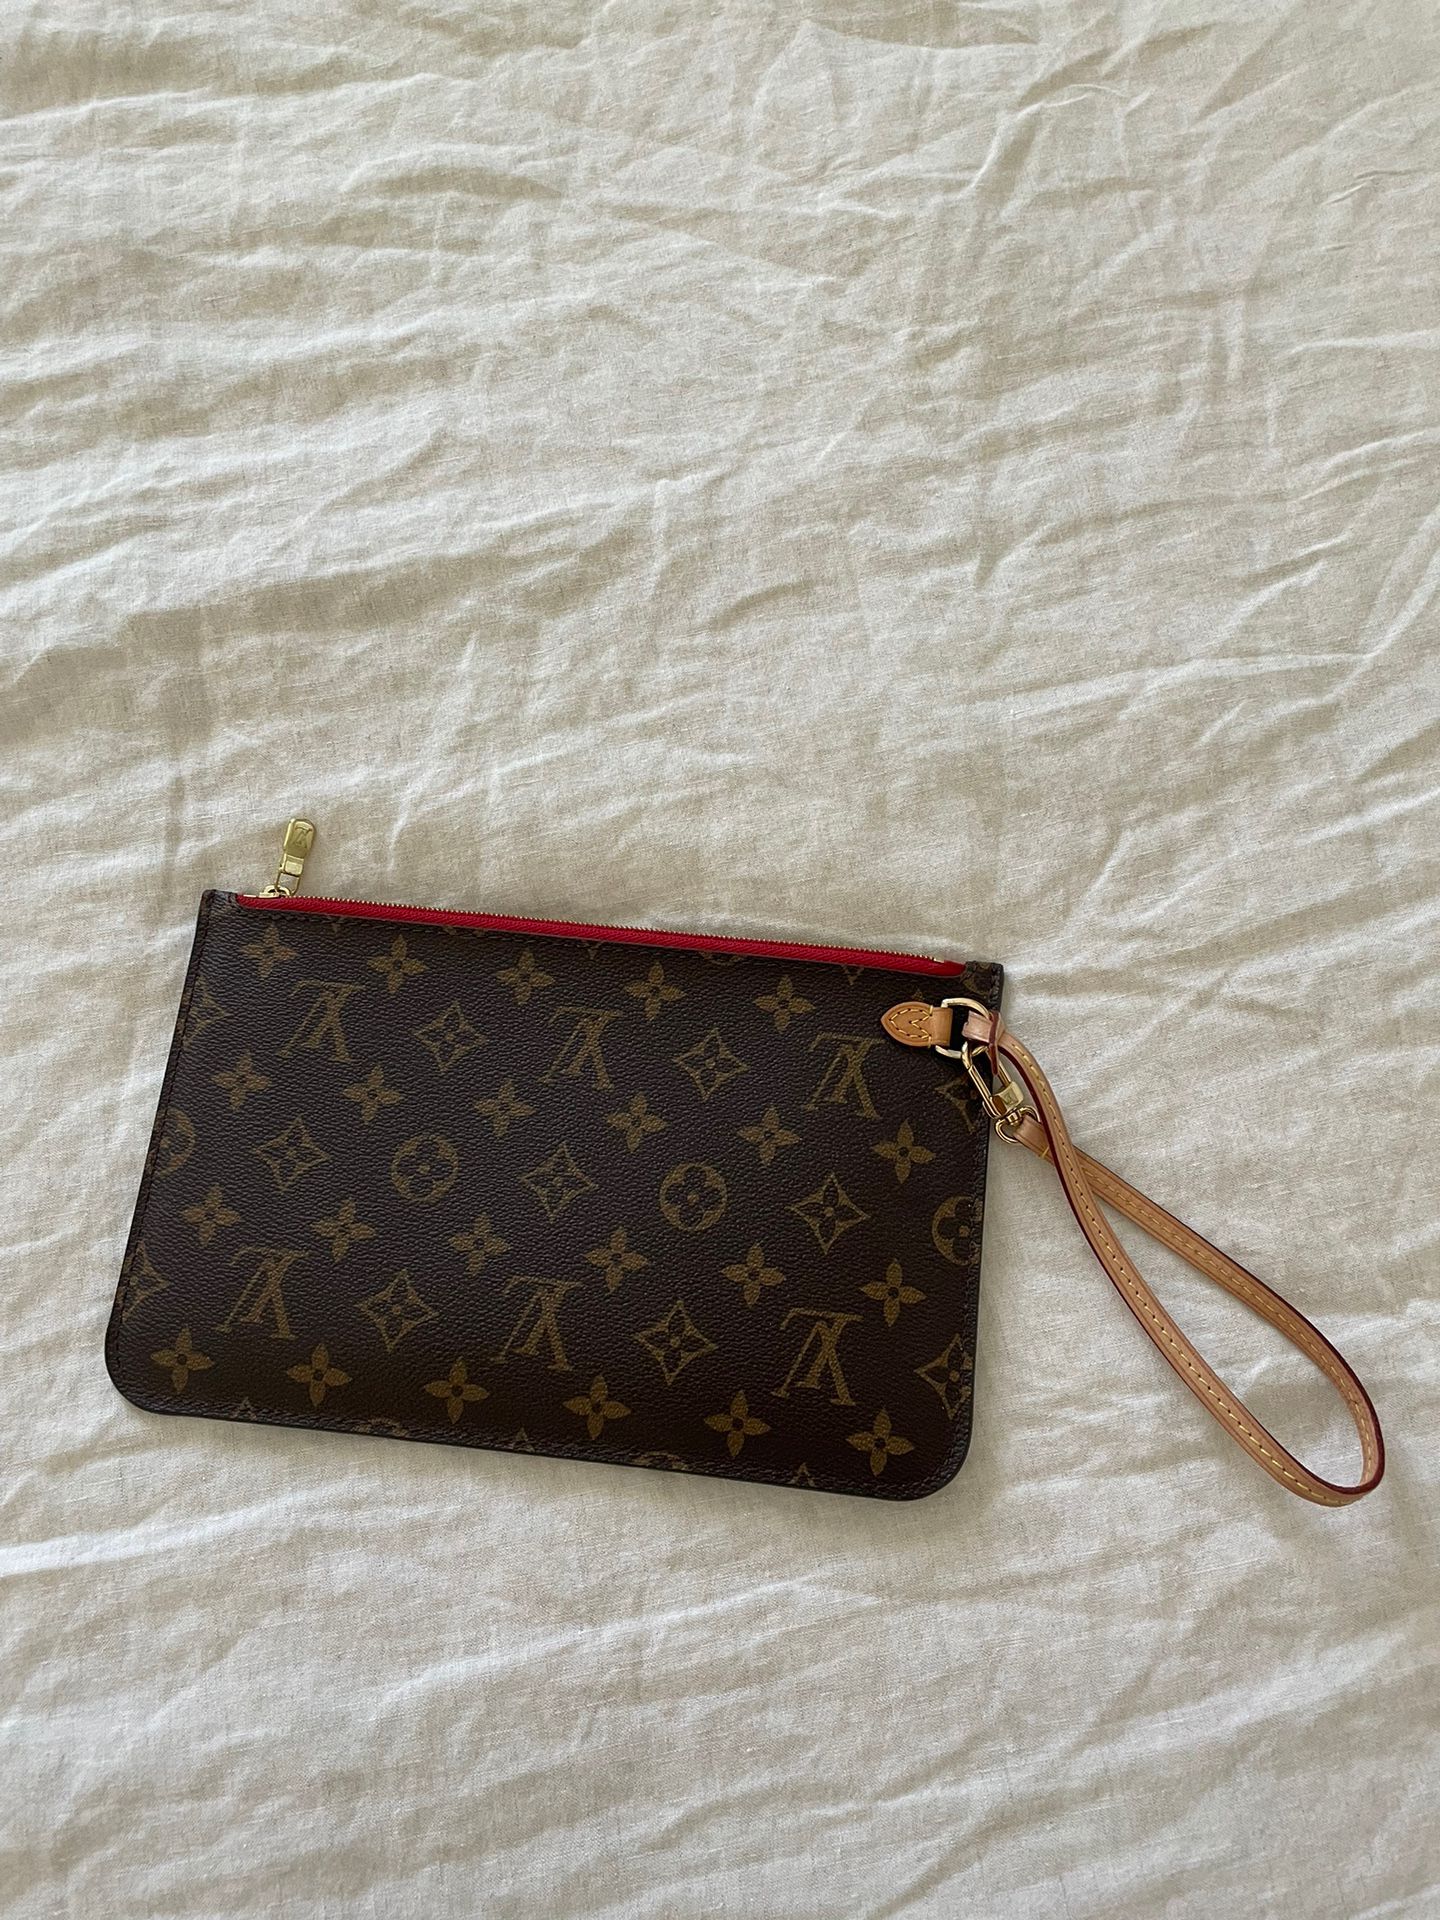 Louis Vuitton Rare Striped Monogram Rayures Neverfull MM Tote 1112lv50  SP4017 for Sale in Norwalk, CT - OfferUp